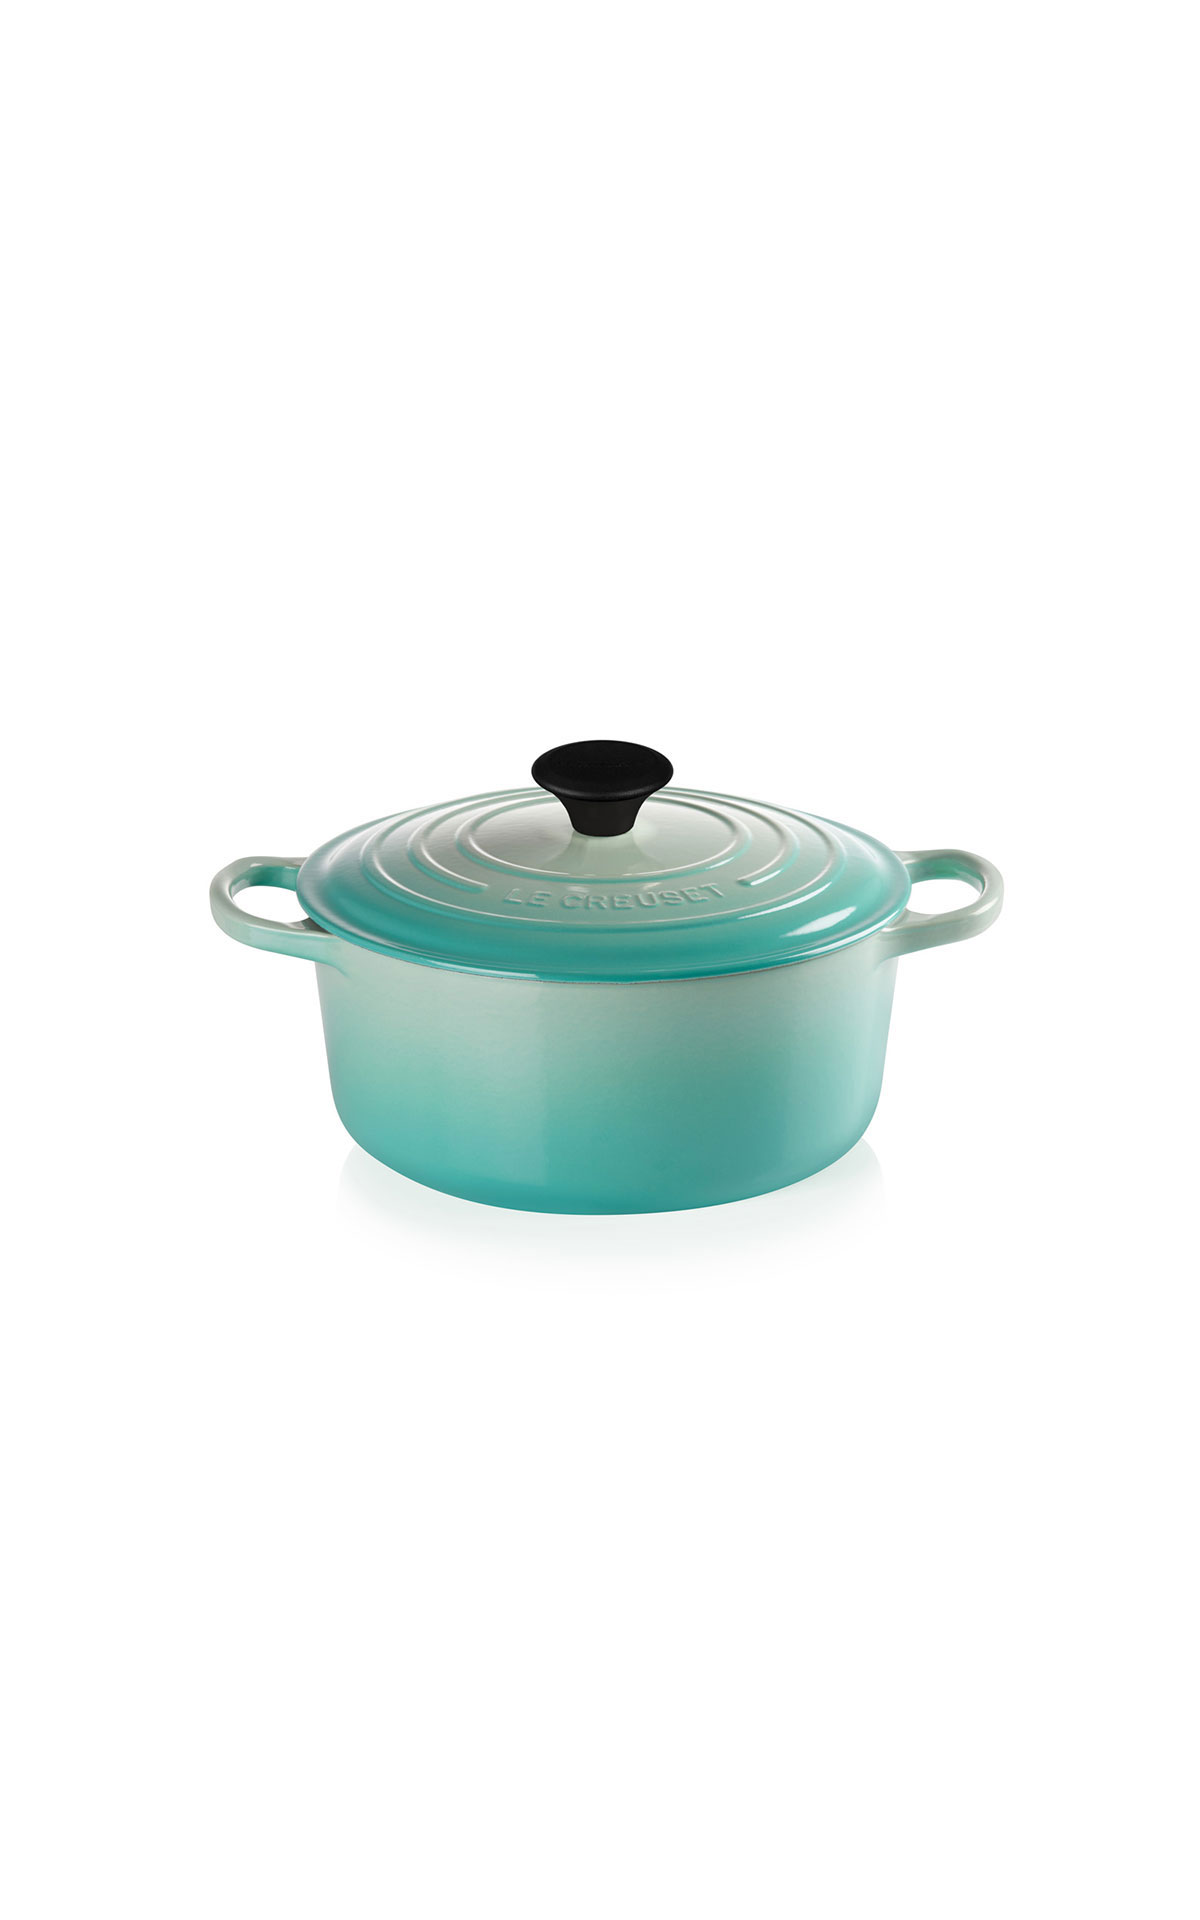 Le Creuset 22cm Cast iron round casserole cool mint from Bicester Village